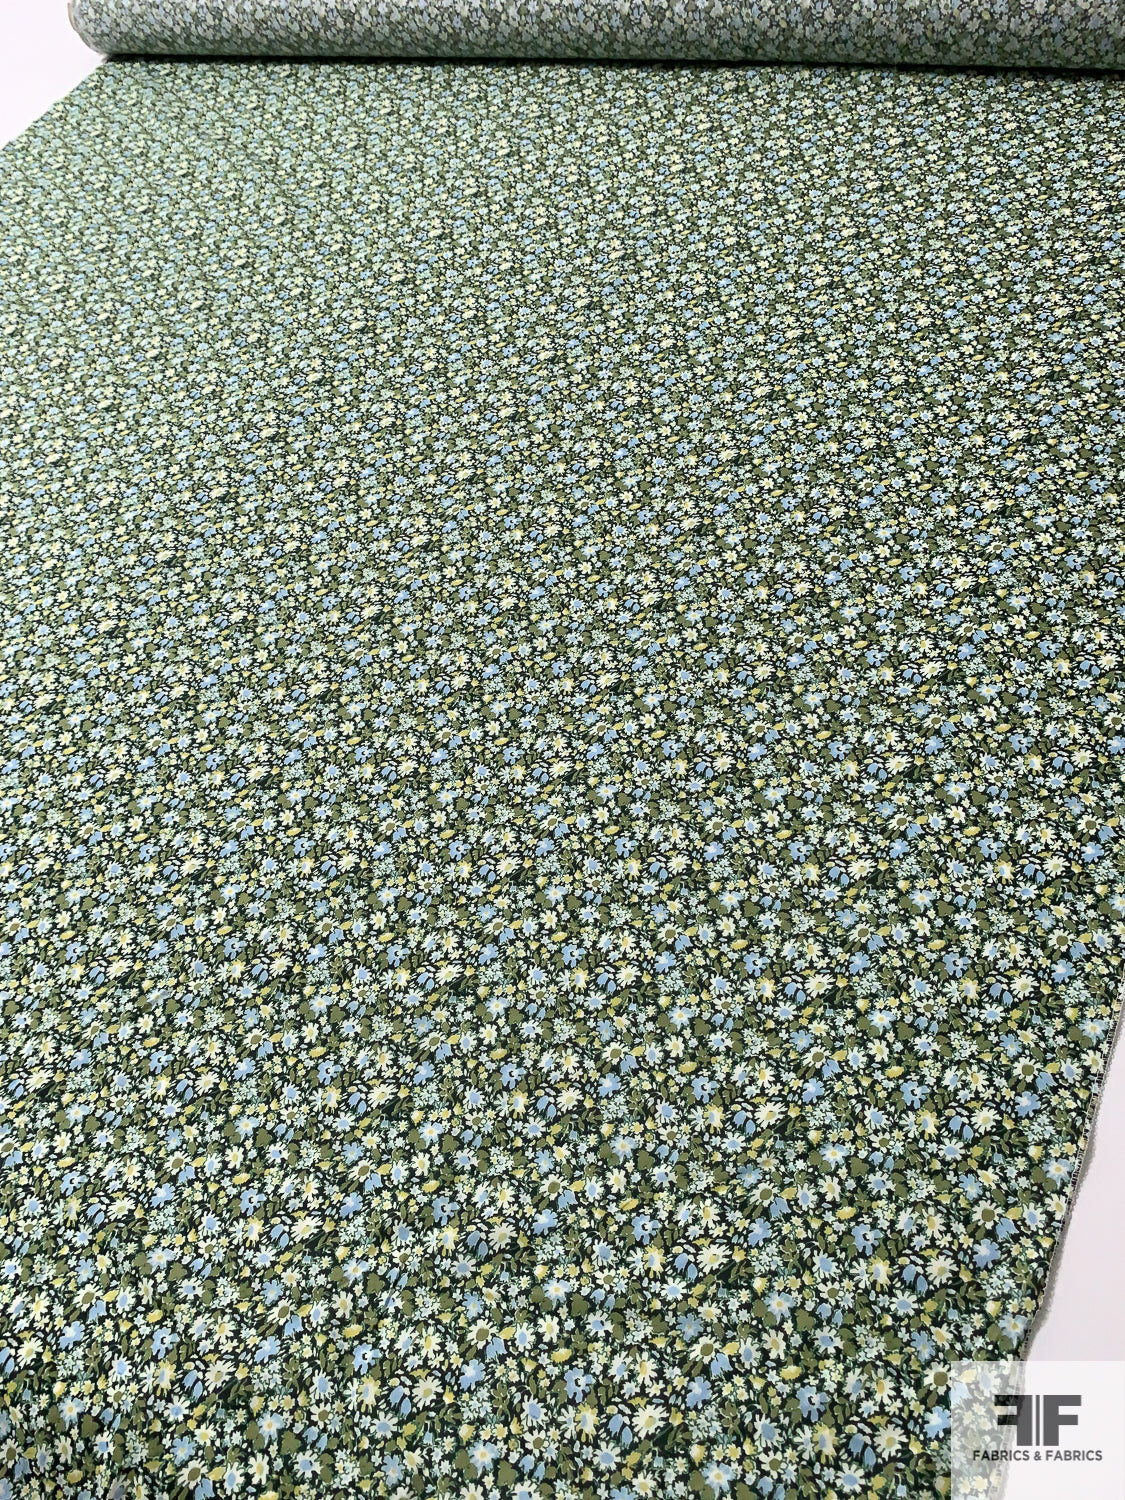 Italian Ditsy Floral Printed Cotton Lawn - Moss Green / Evergreen / Baby  Blue - Fabric by the Yard